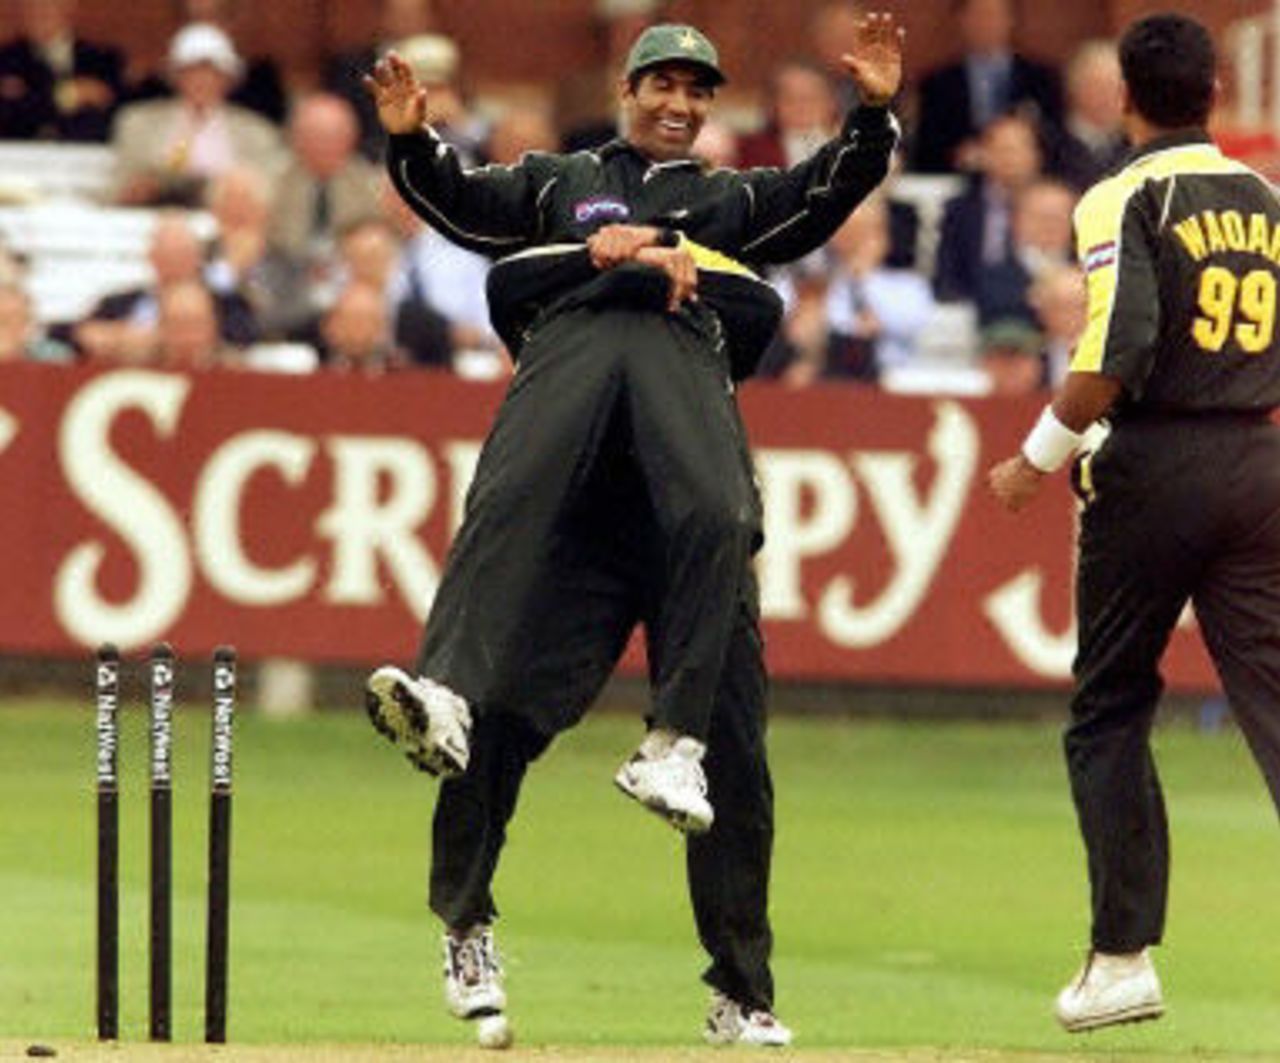 Yousuf Youhana is hoisted by a team-mate after running out Cork as Waqar Younis joins in, 4th ODI at Lords, 12 June 2001.